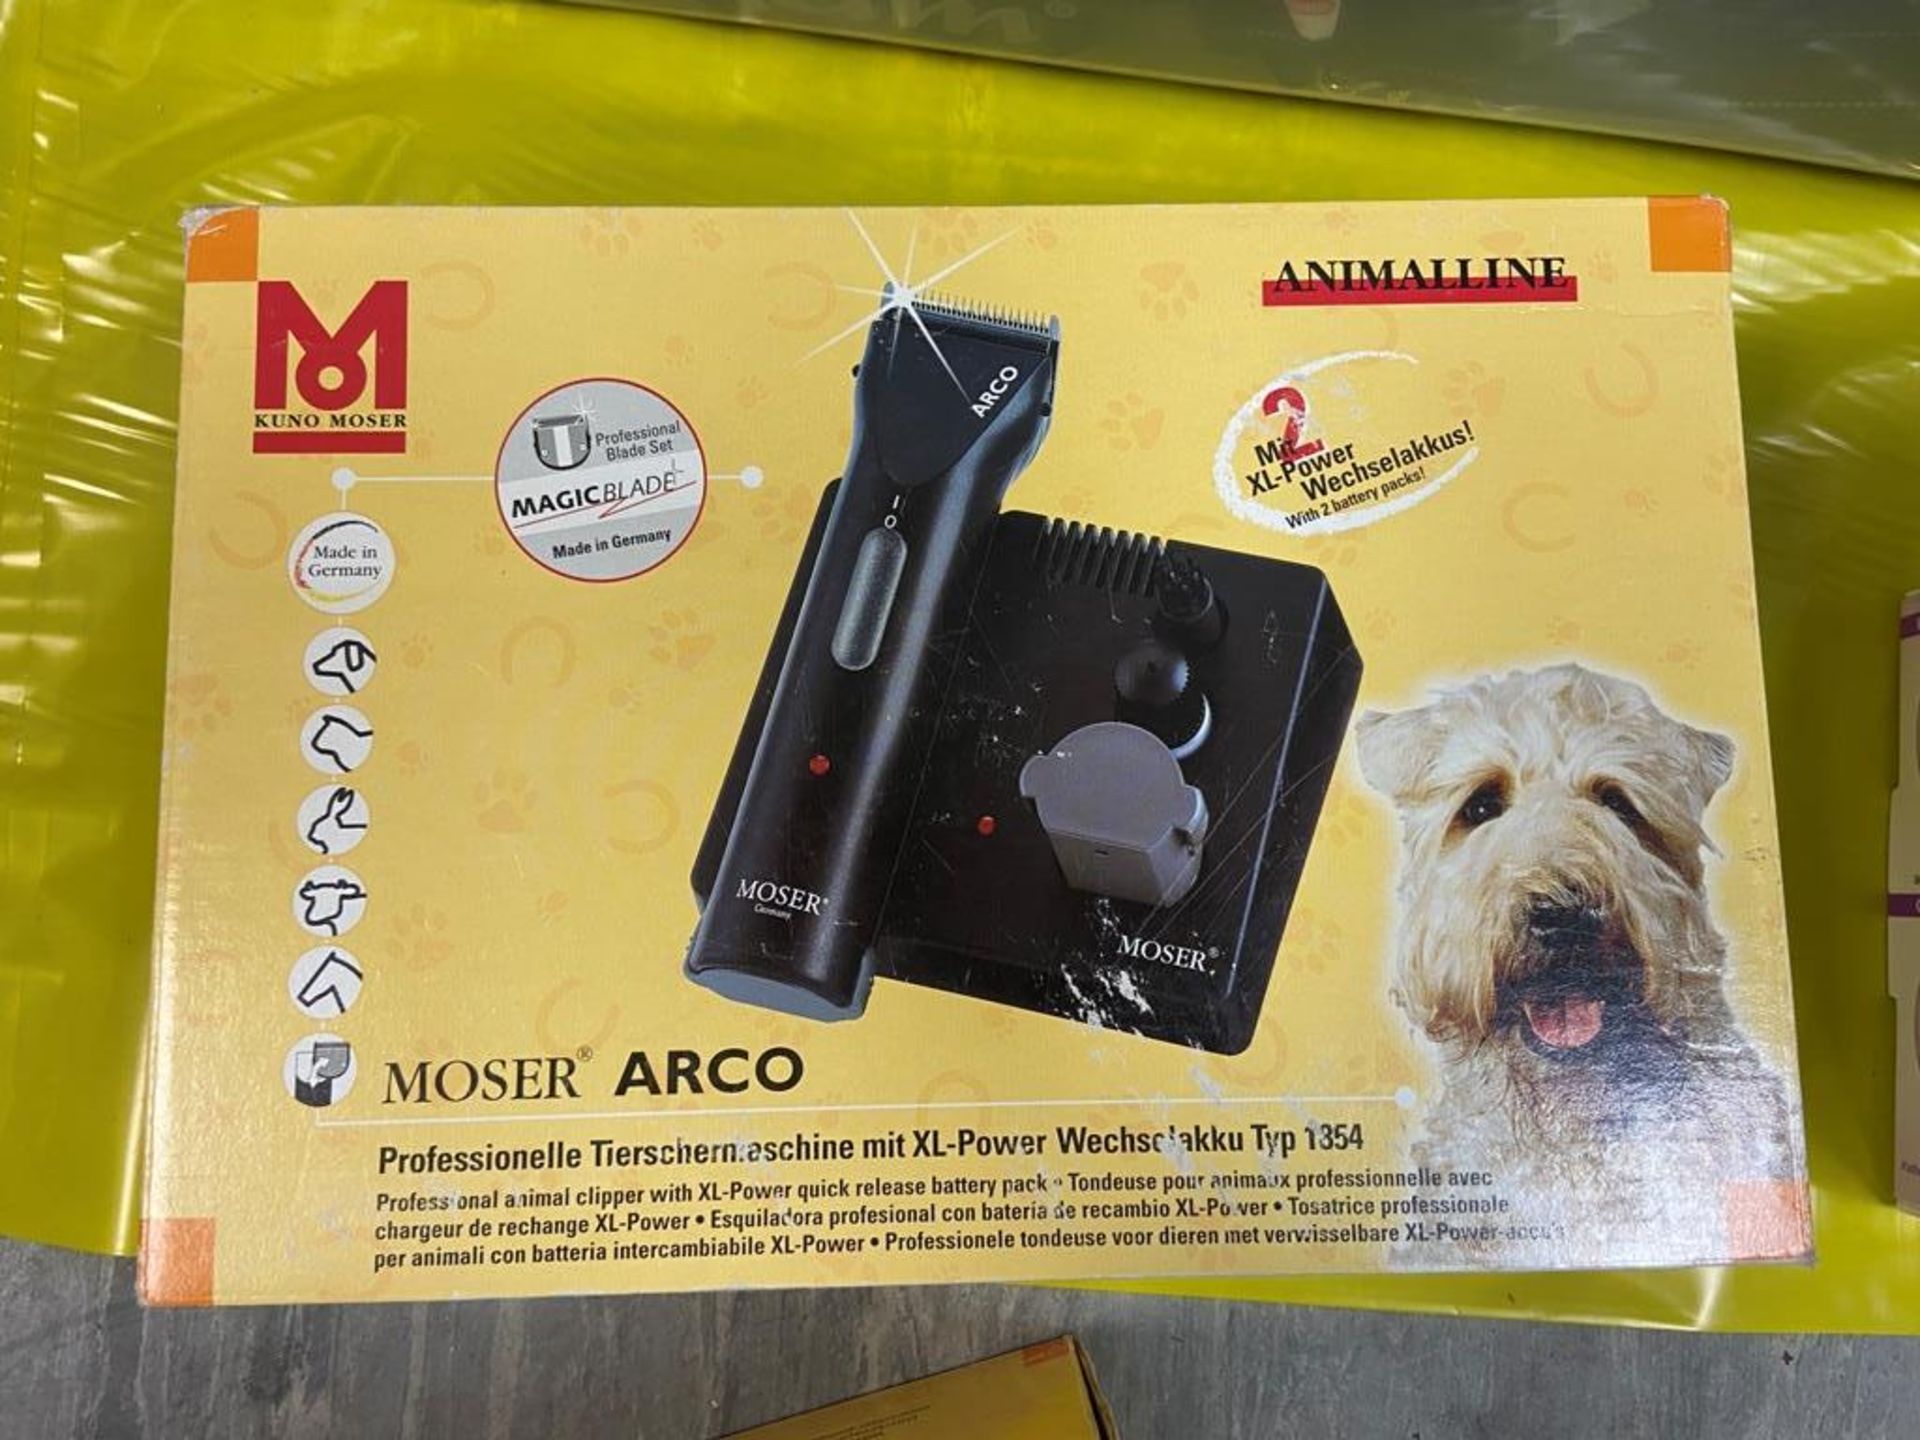 Two Animalline Moser Arco animal clippers, boxed/unused - Image 2 of 2